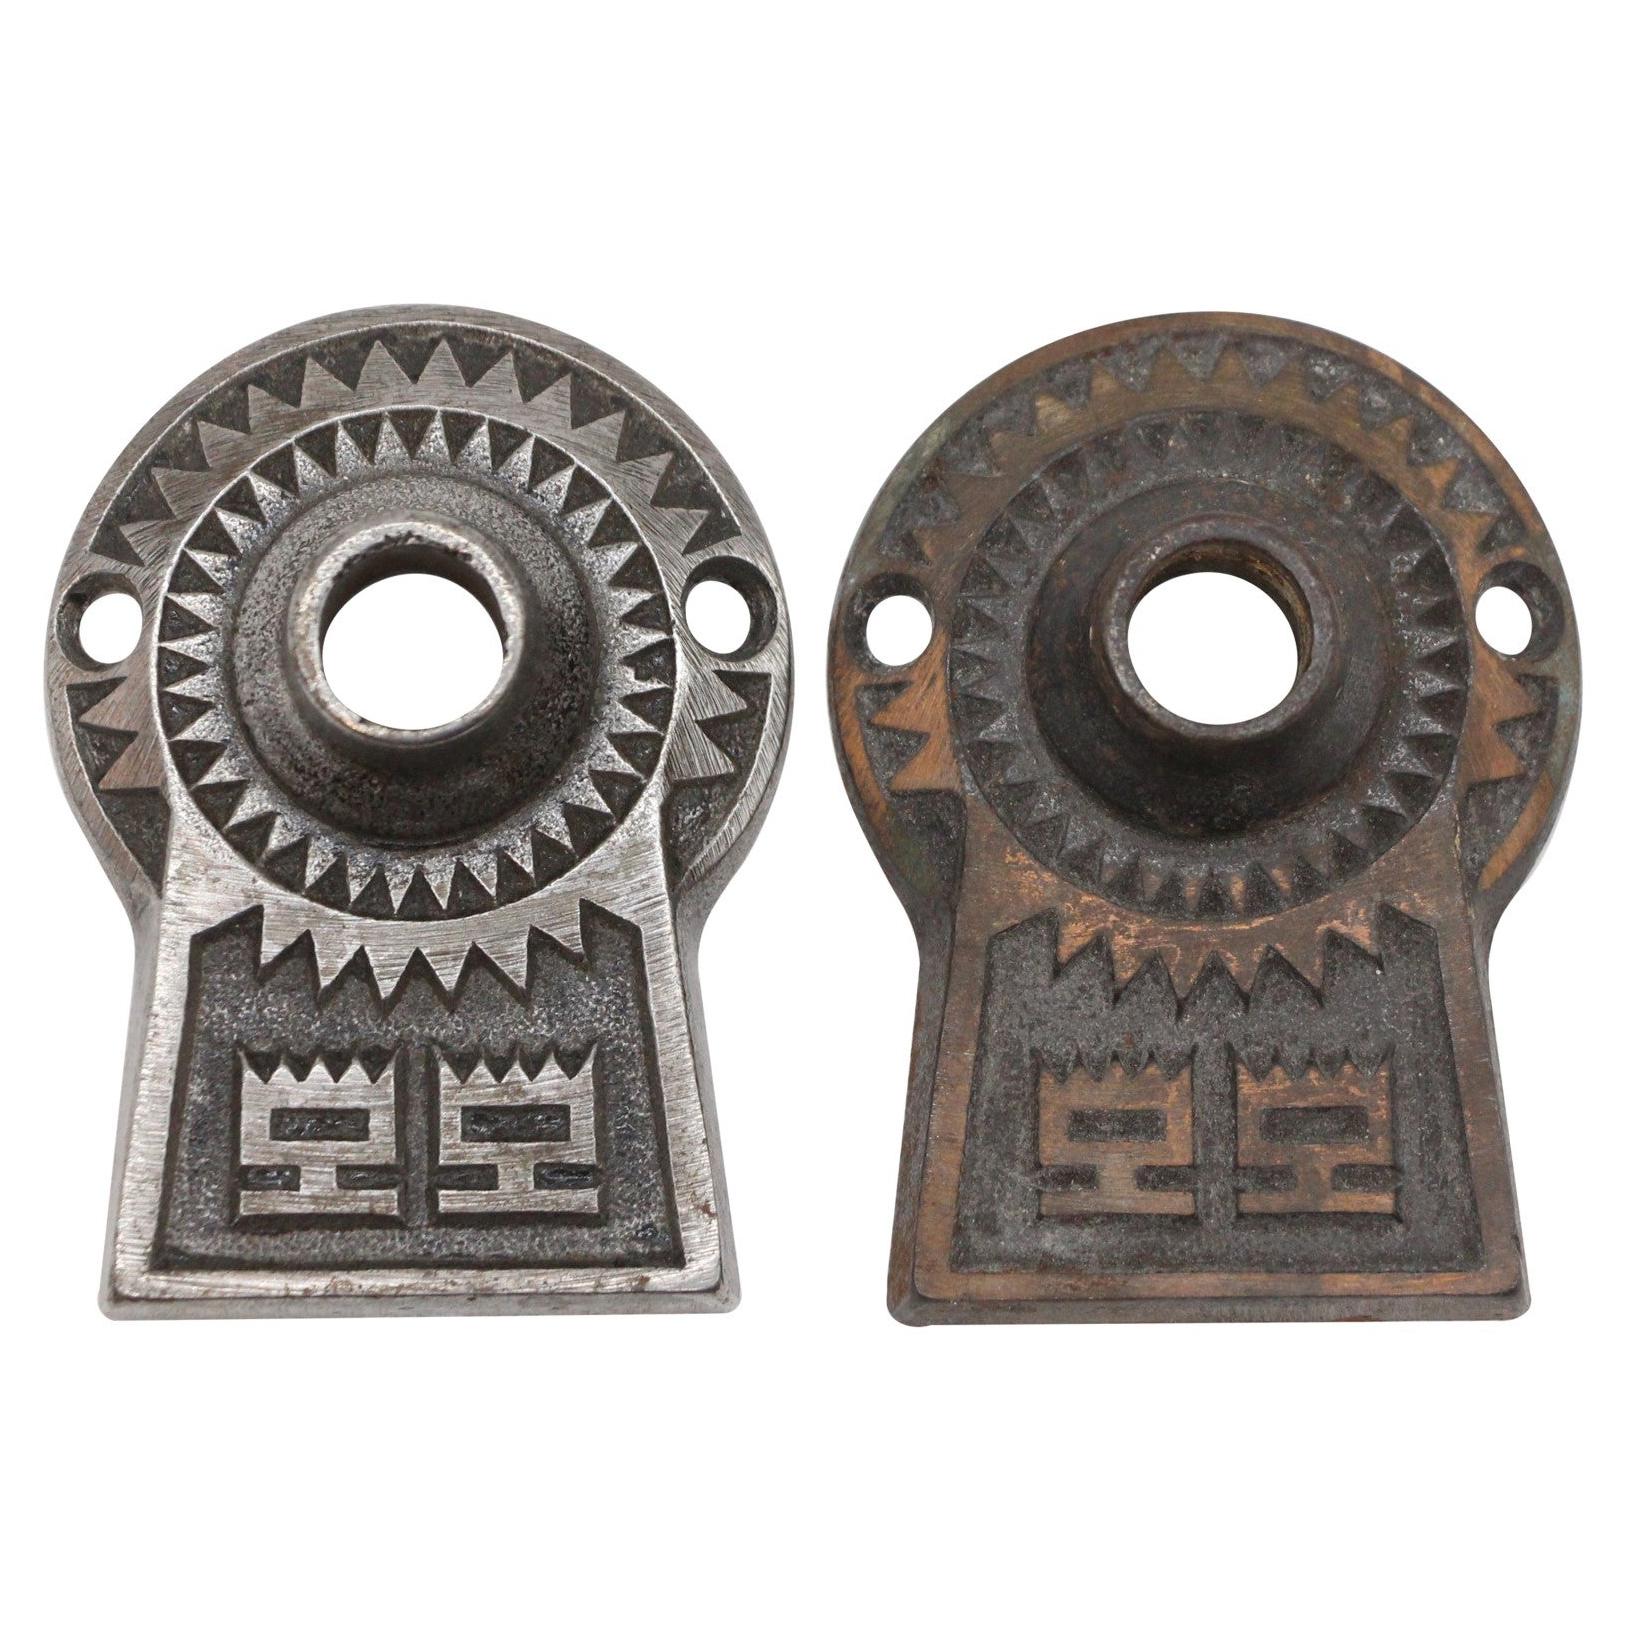 Pair of Cast Iron Aesthetic Doorknob Rosettes, Early 20th C.